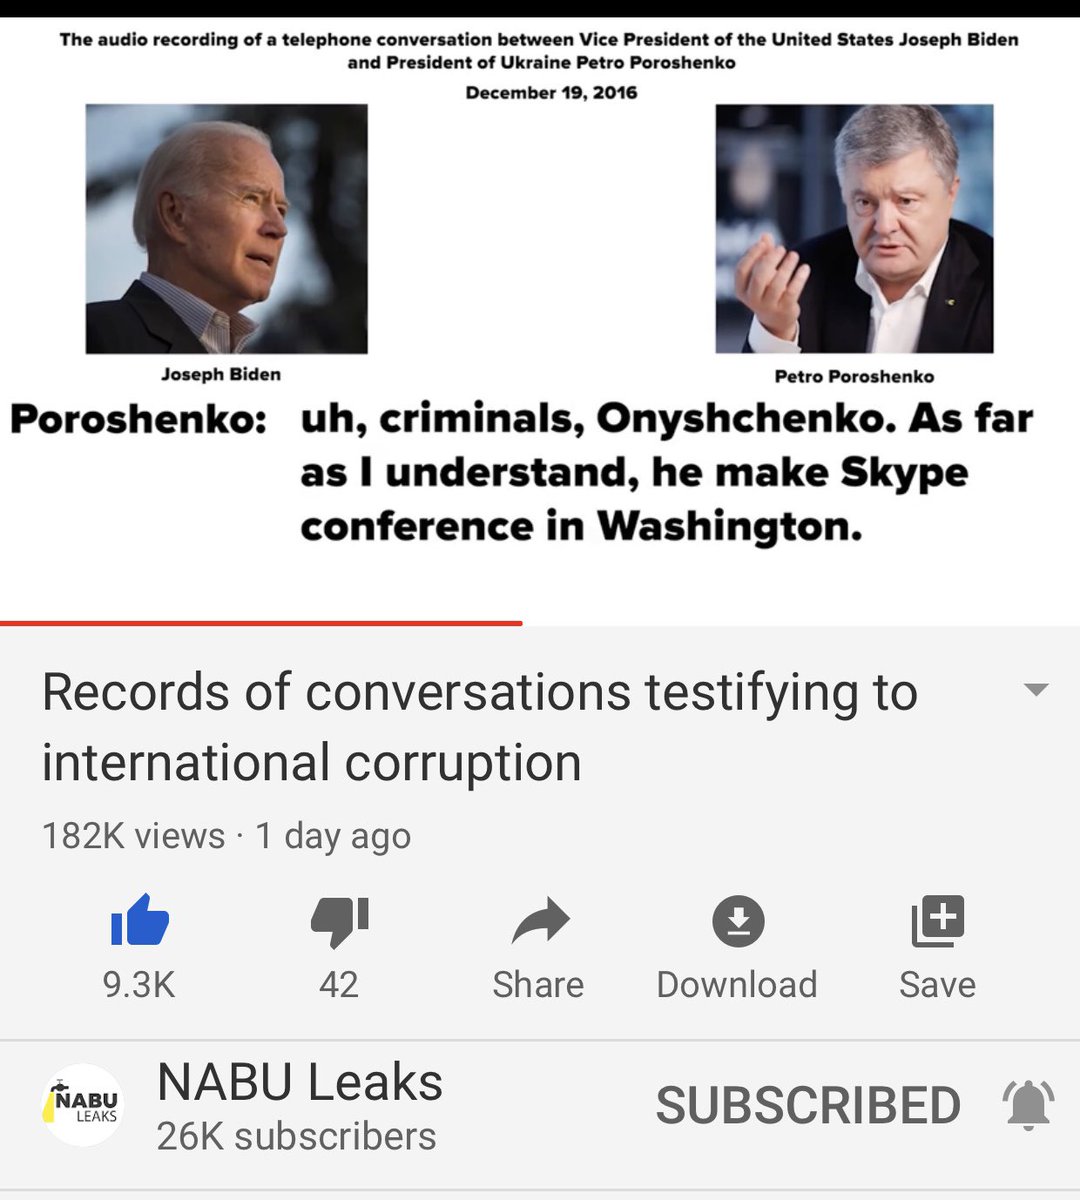 Dec 2016 call. Think back. Biden knew that Trump was taking over in a month but yet he still doesn’t seem to give zero fucks. Here’s Poroshenko thanking Biden for the “clear signal” which we’ve heard a few times now. He’s discussing how Onyshchenko might be cooperating w/the FBI